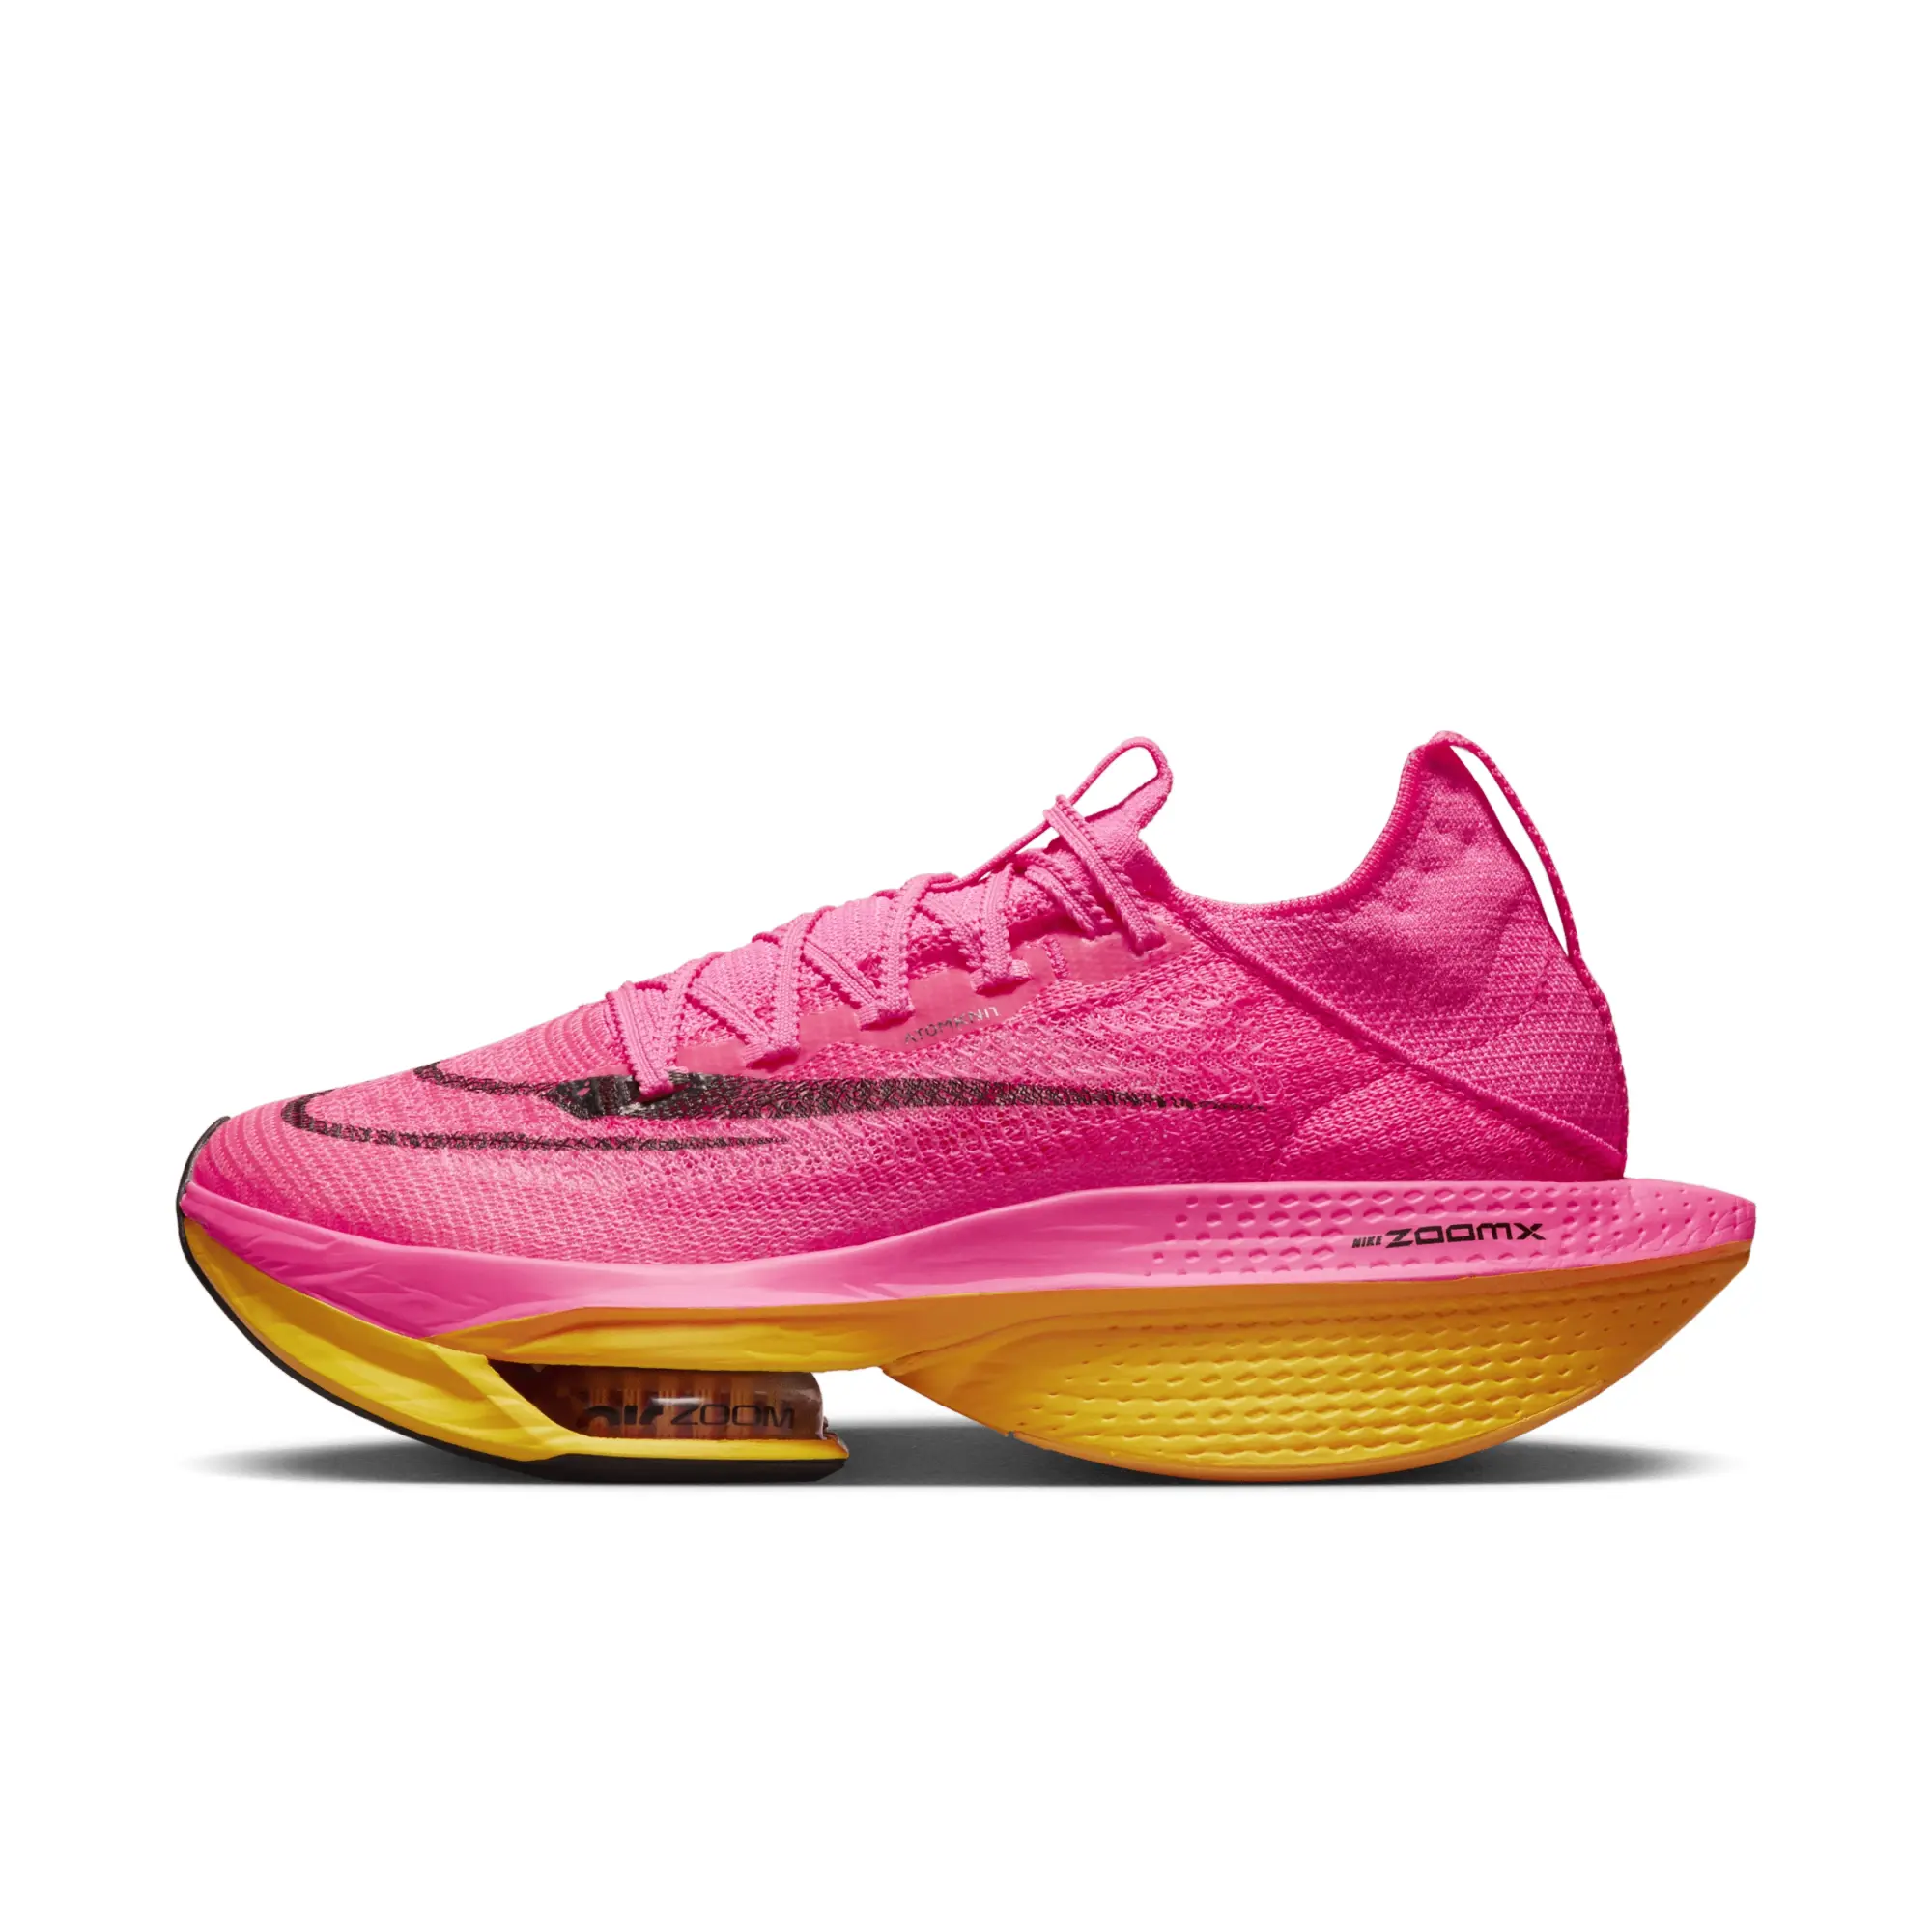 Nike Air Zoom Alphafly Next% 2 Womens Hyper Pink Laser Orange Shoes